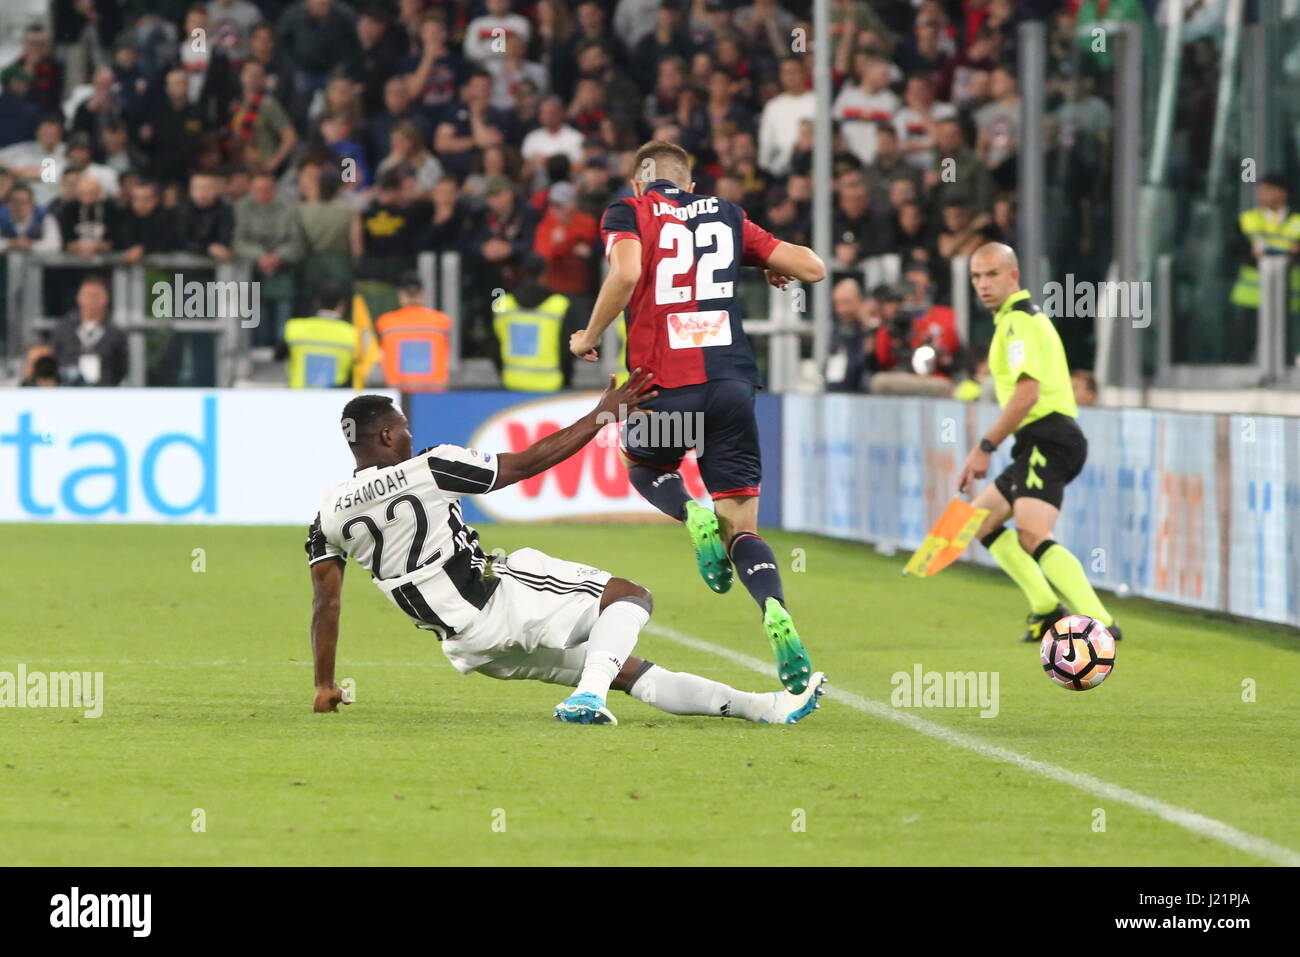 Turin, Italy. 23rd Apr, 2017. Kwadwo Asamoah (Juventus FC) and Darko Lazovic (Genoa FC) compete for the ball during the Serie A football match between Juventus FC and Genoa FC at Juventus Stadium on April 23, 2017 in Turin, Italy. Credit: Massimiliano Ferraro/Alamy Live News Stock Photo